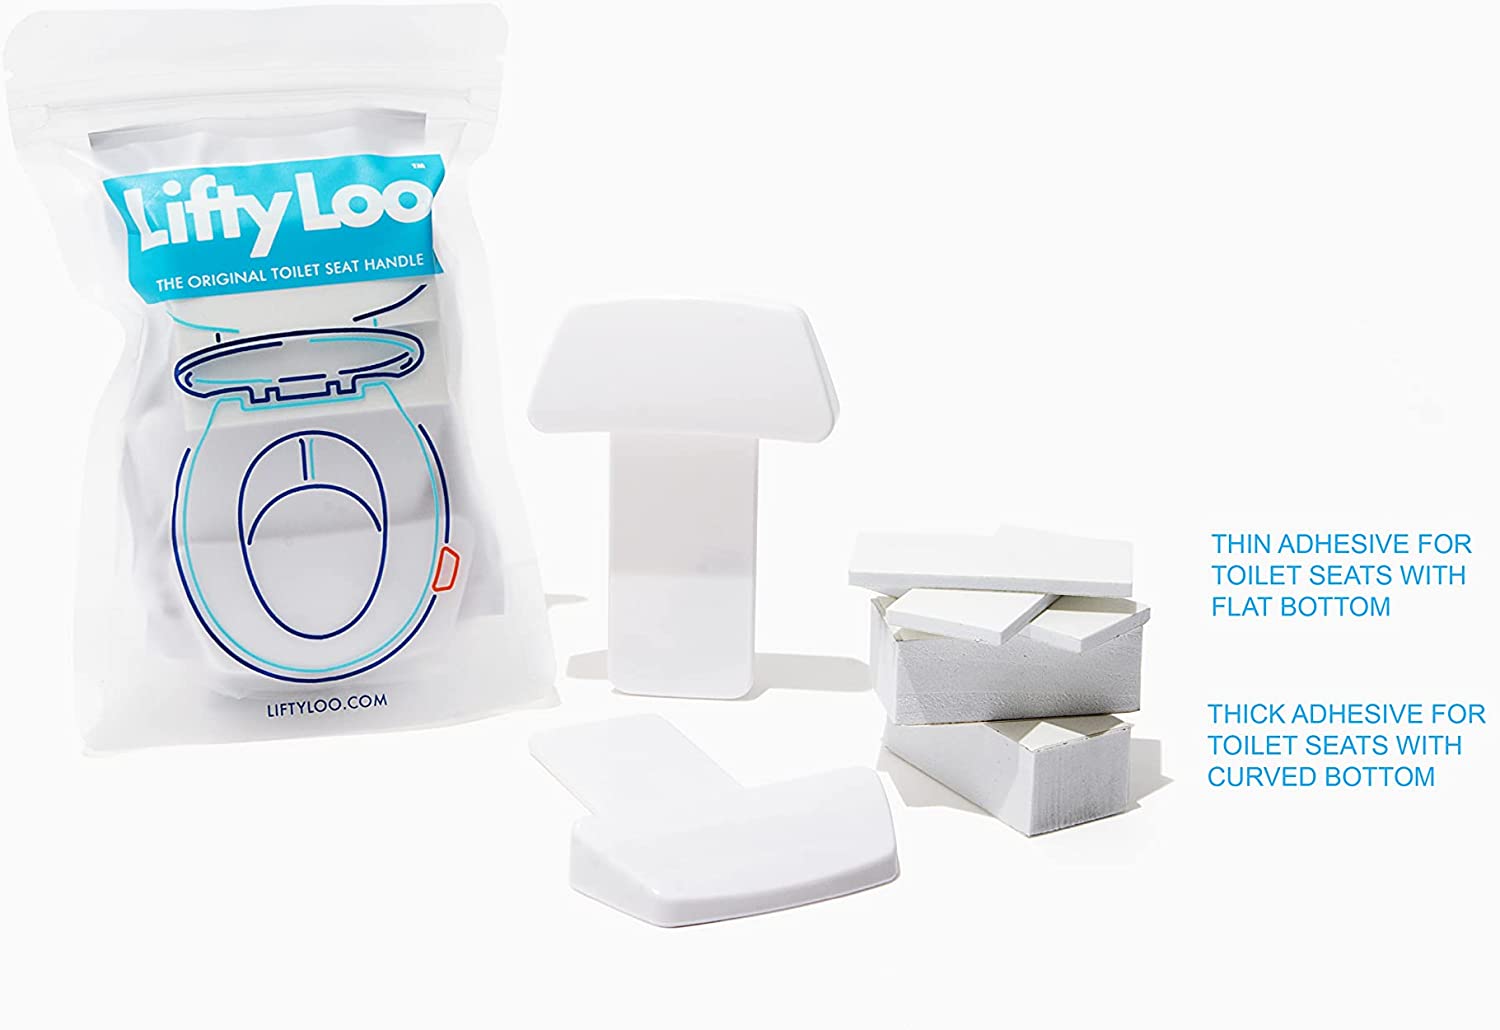 White-colored lifty loo's antimicrobial toilet seat handle